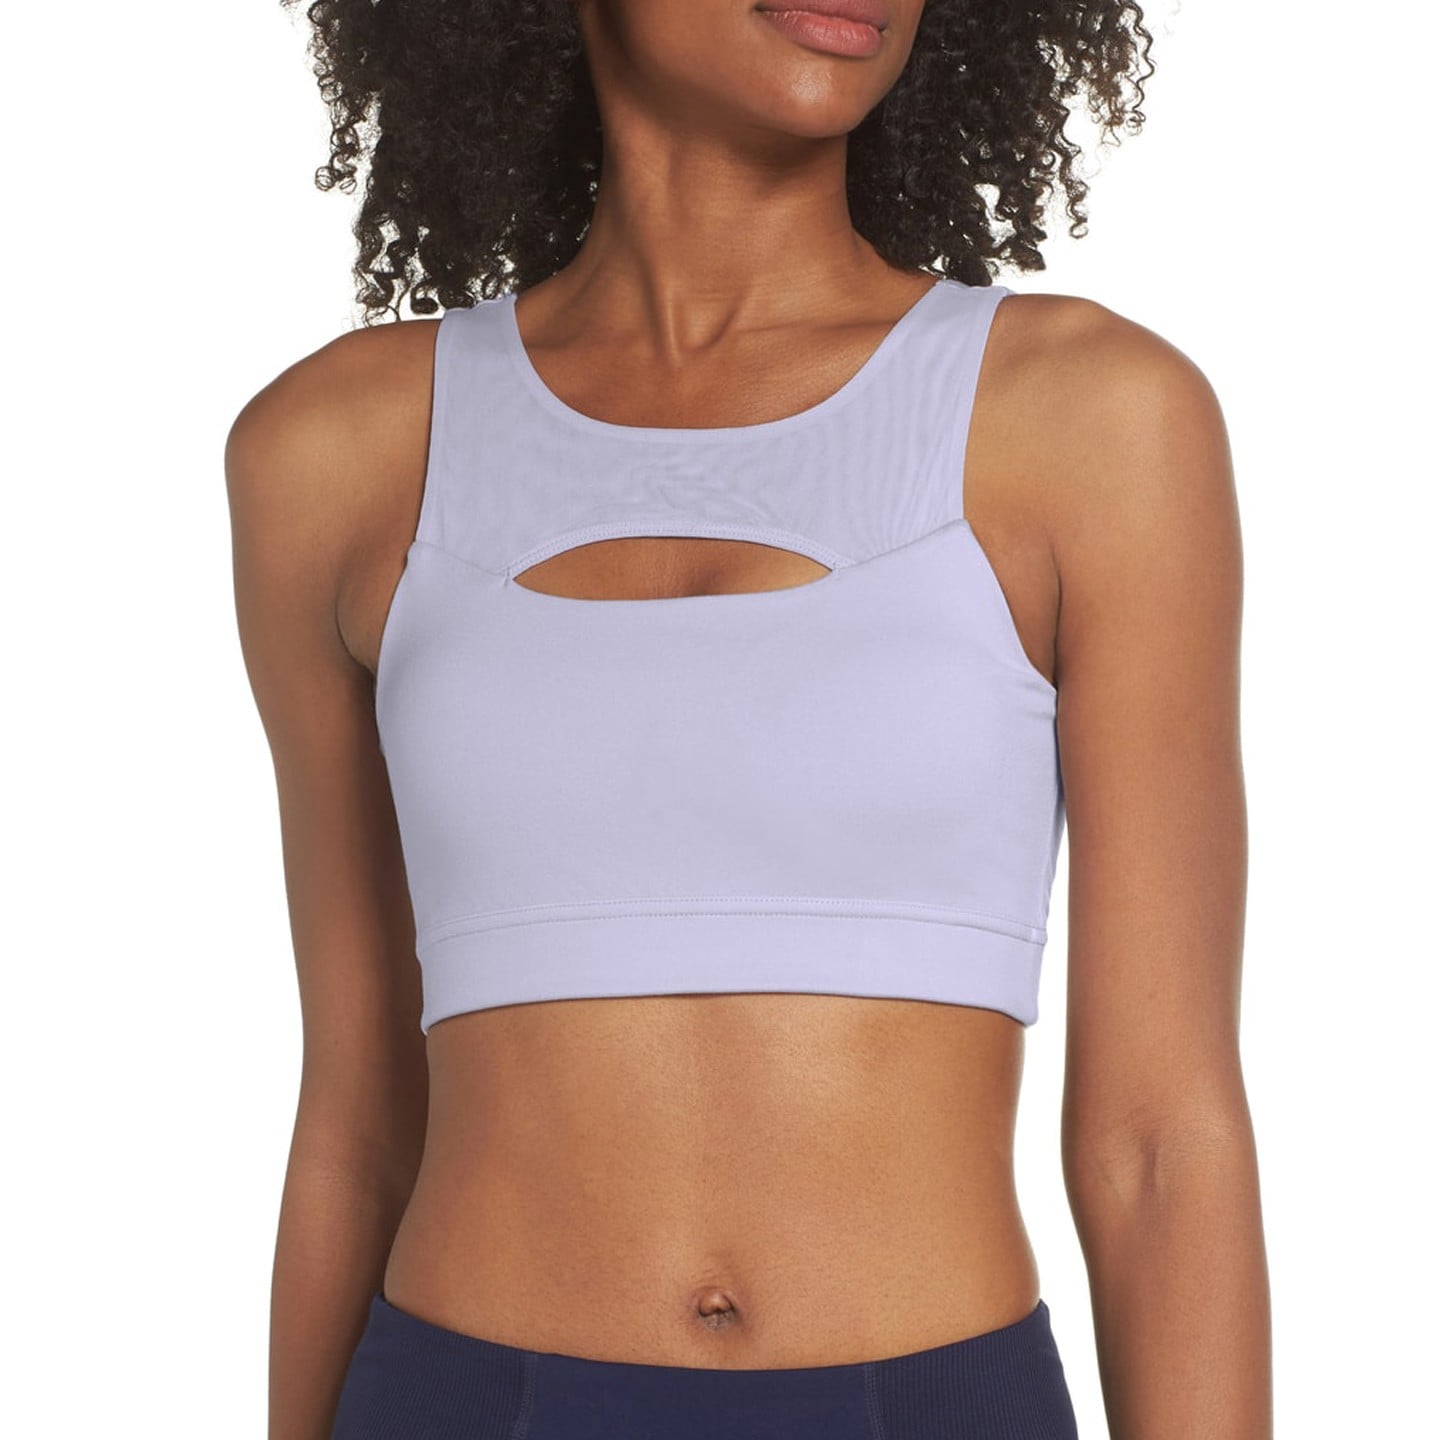 34 Sports bra for small chest ideas